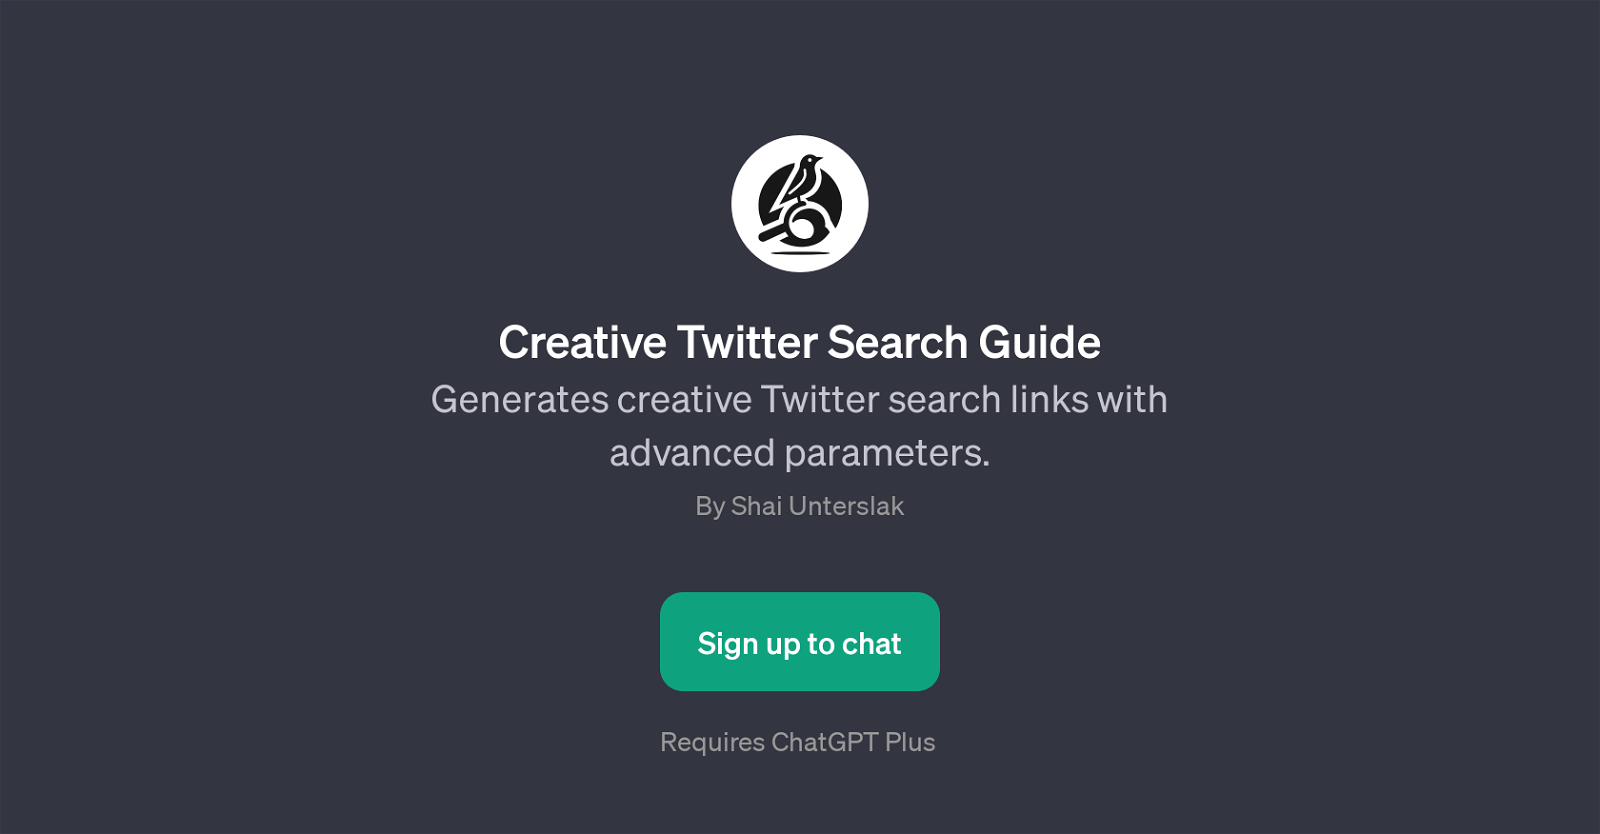 Creative Twitter Search Guide website